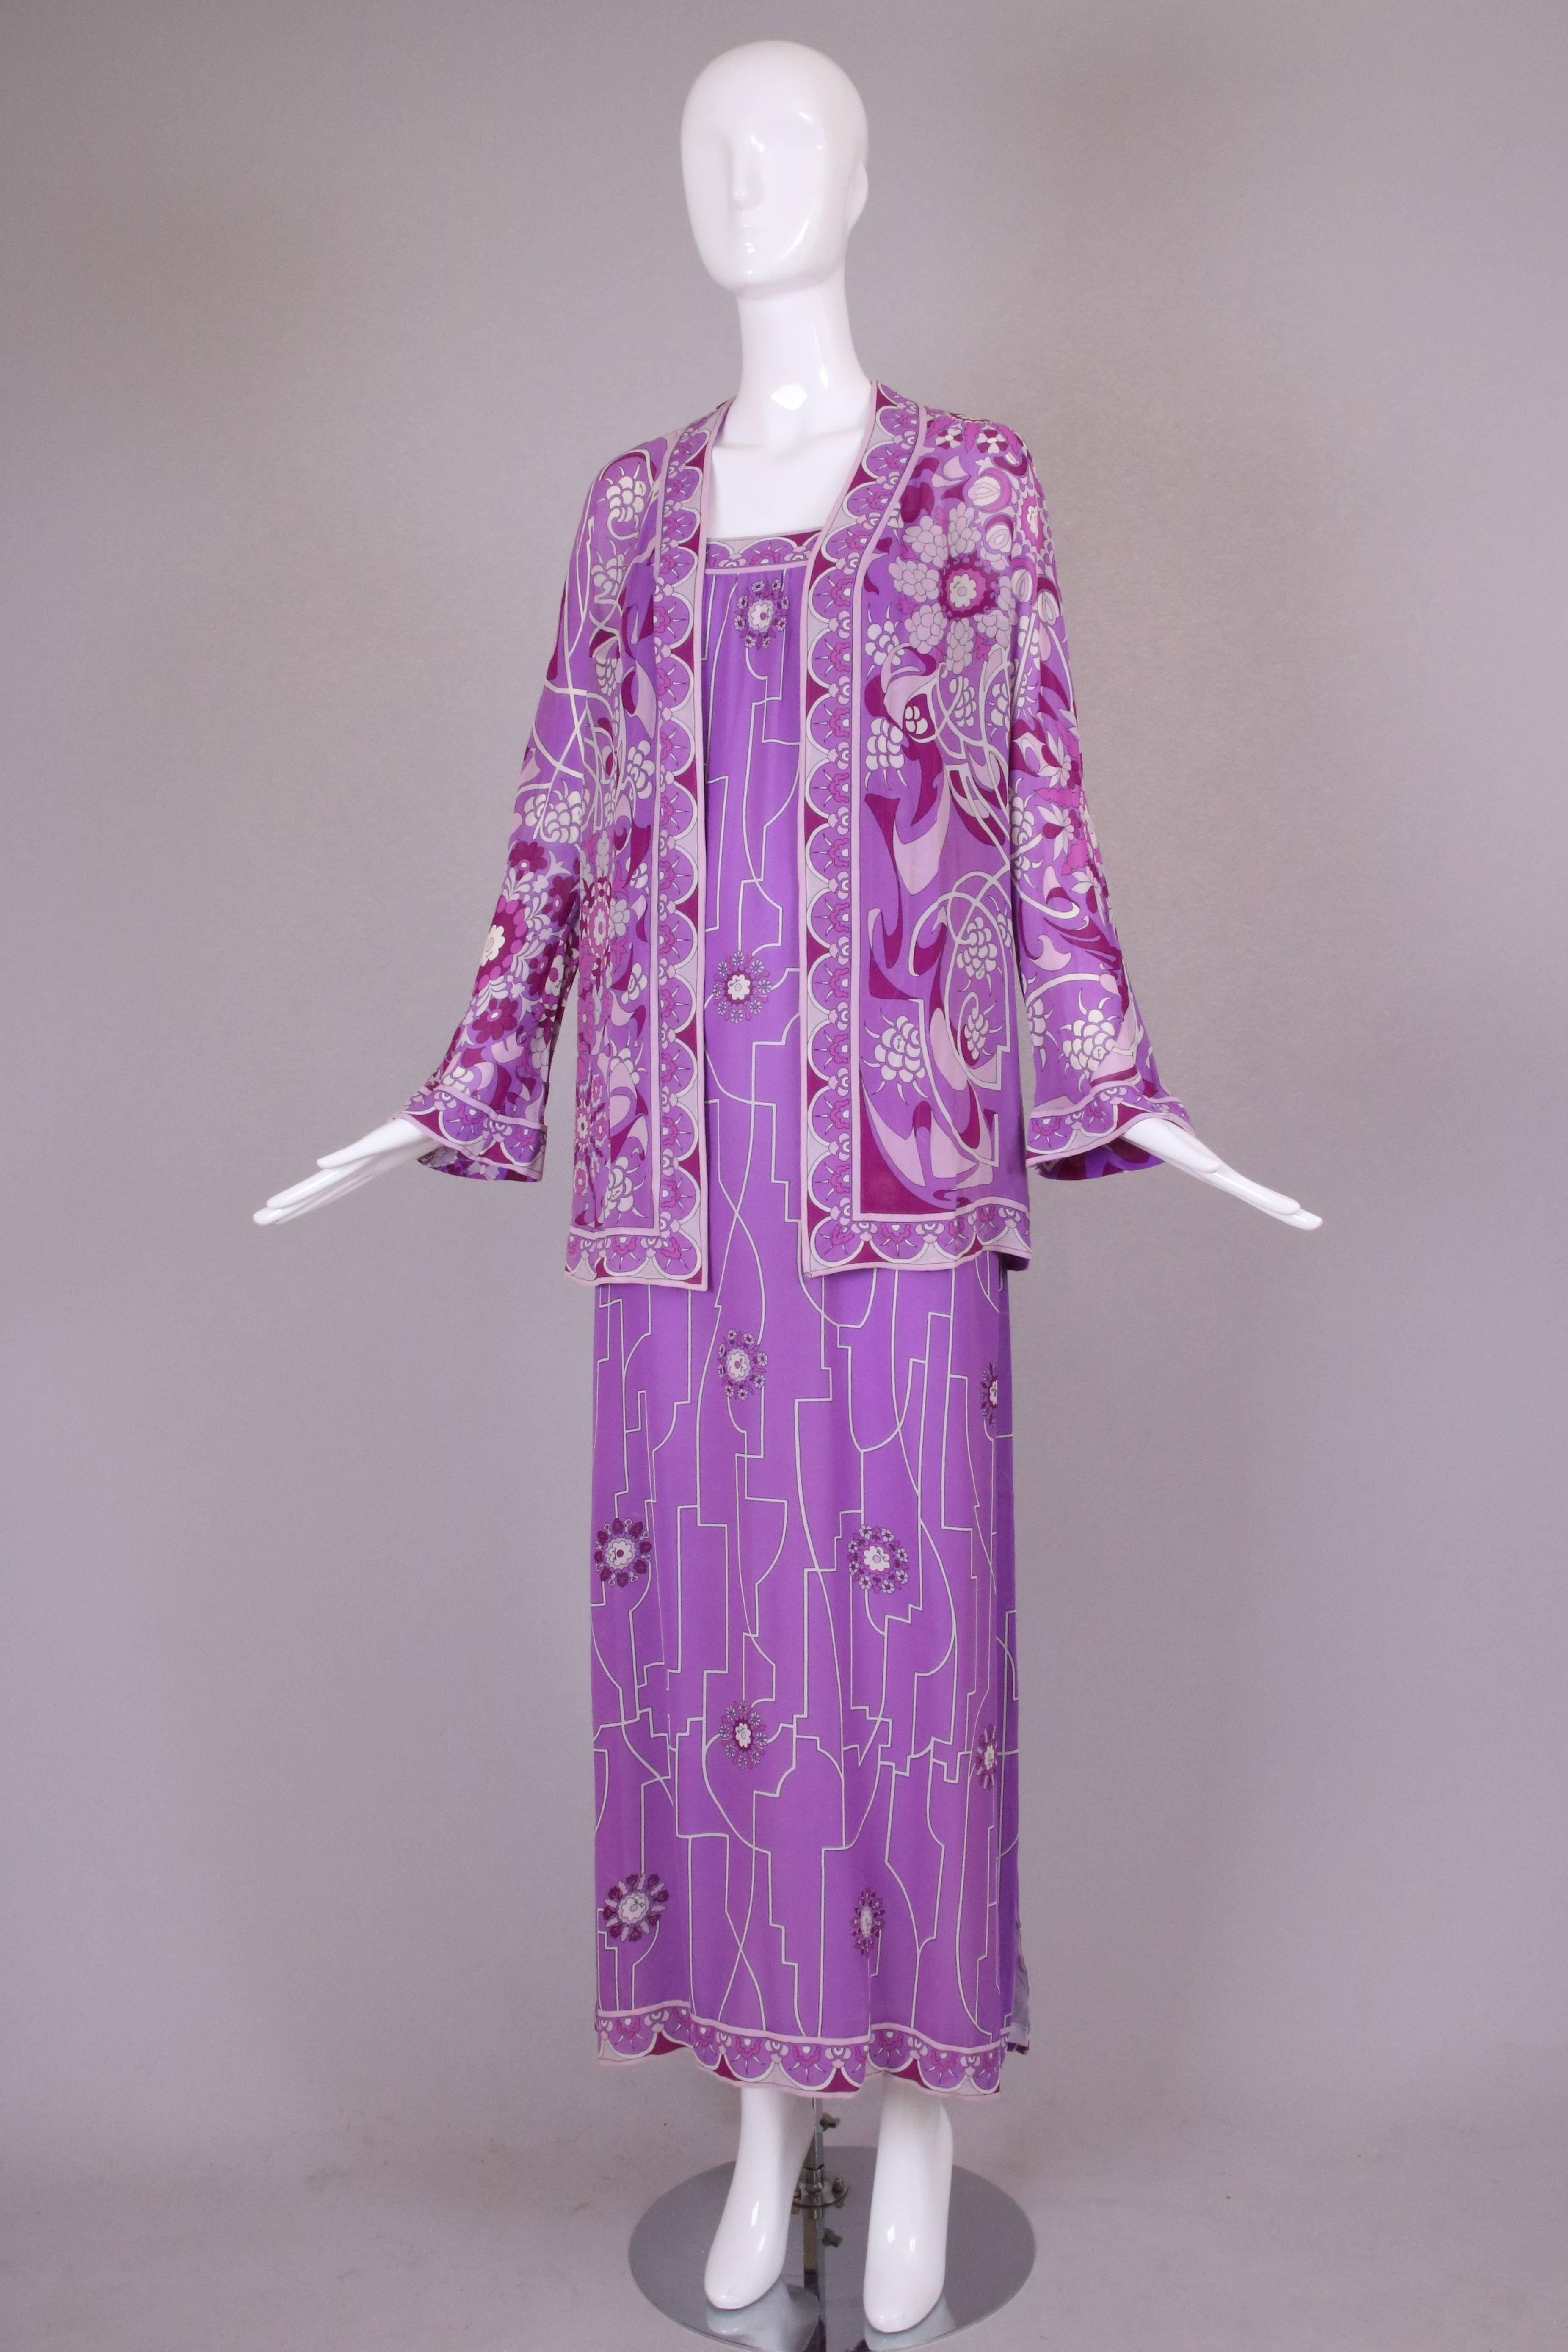 1970's Pucci maxi dress in deep purple, purple, lavender and white silk chiffon with spaghetti straps. This dress has lavender chiffon attached slip. In very good to excellent condition with some very light color fading to the dress at the bottom